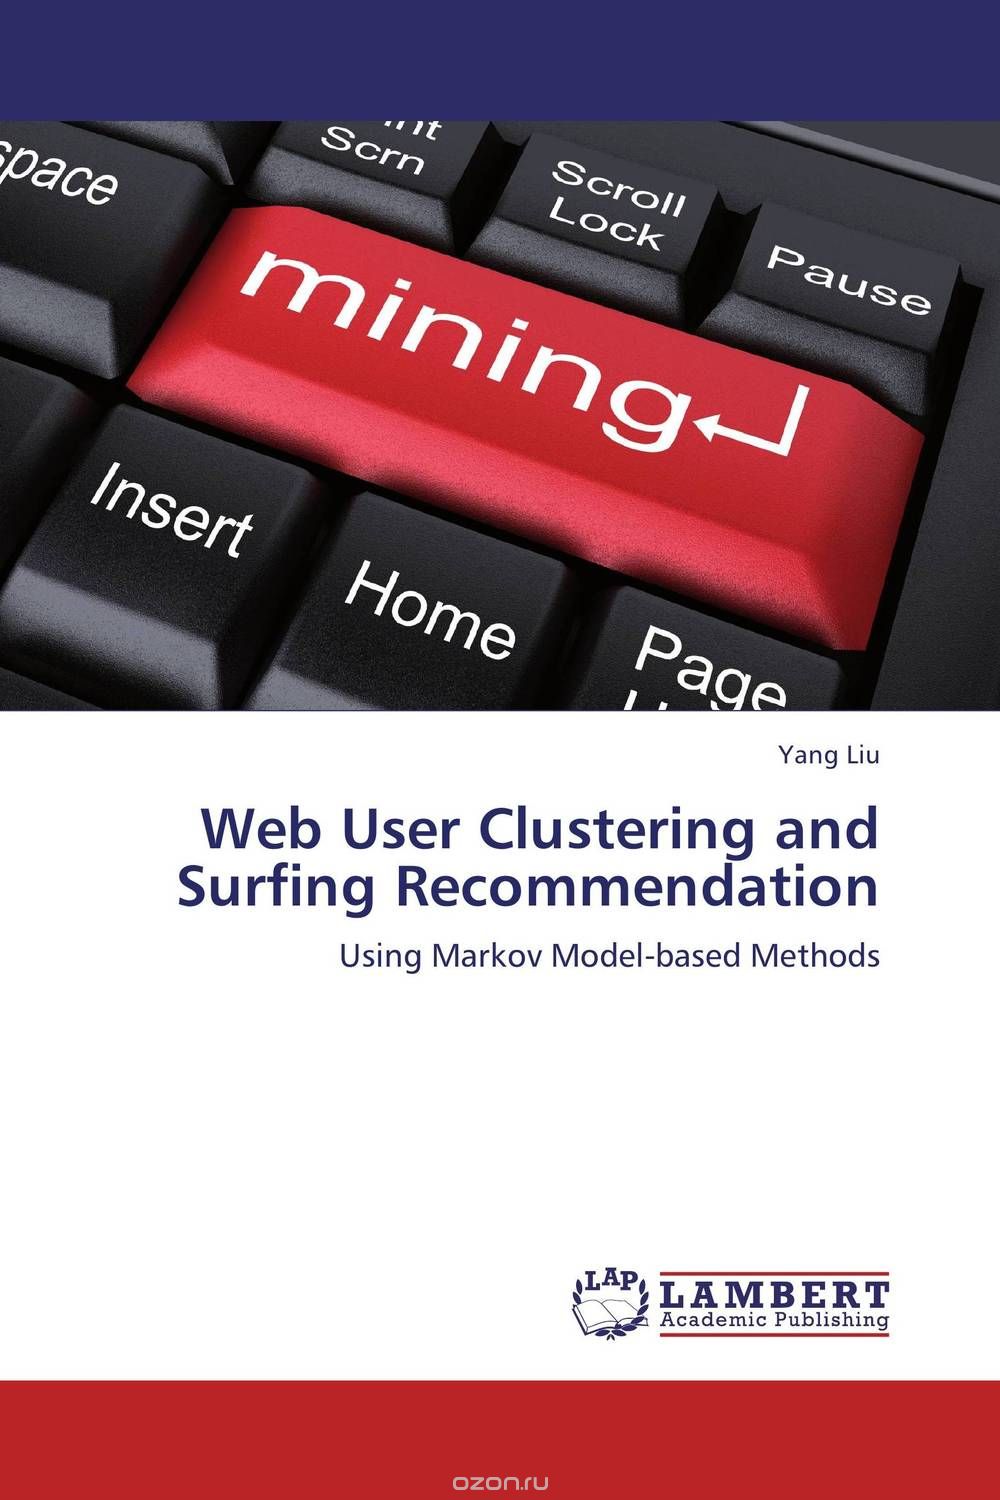 Web User Clustering and Surfing Recommendation